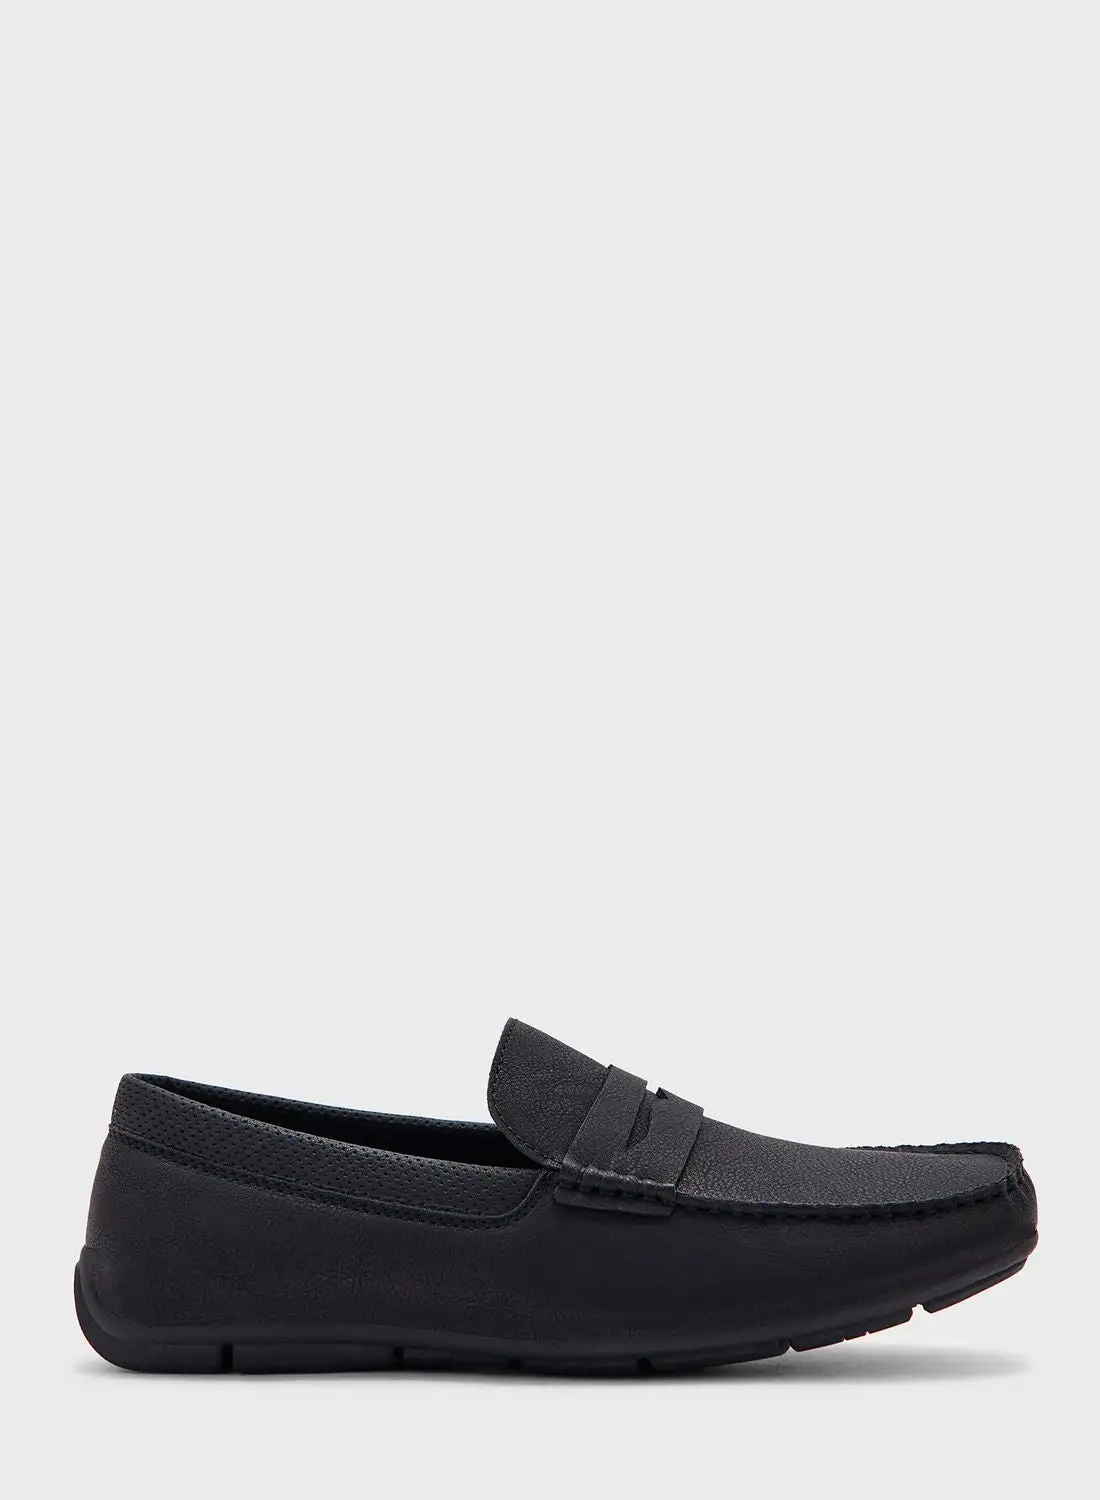 CALL IT SPRING Casual Slip Ons Loafers